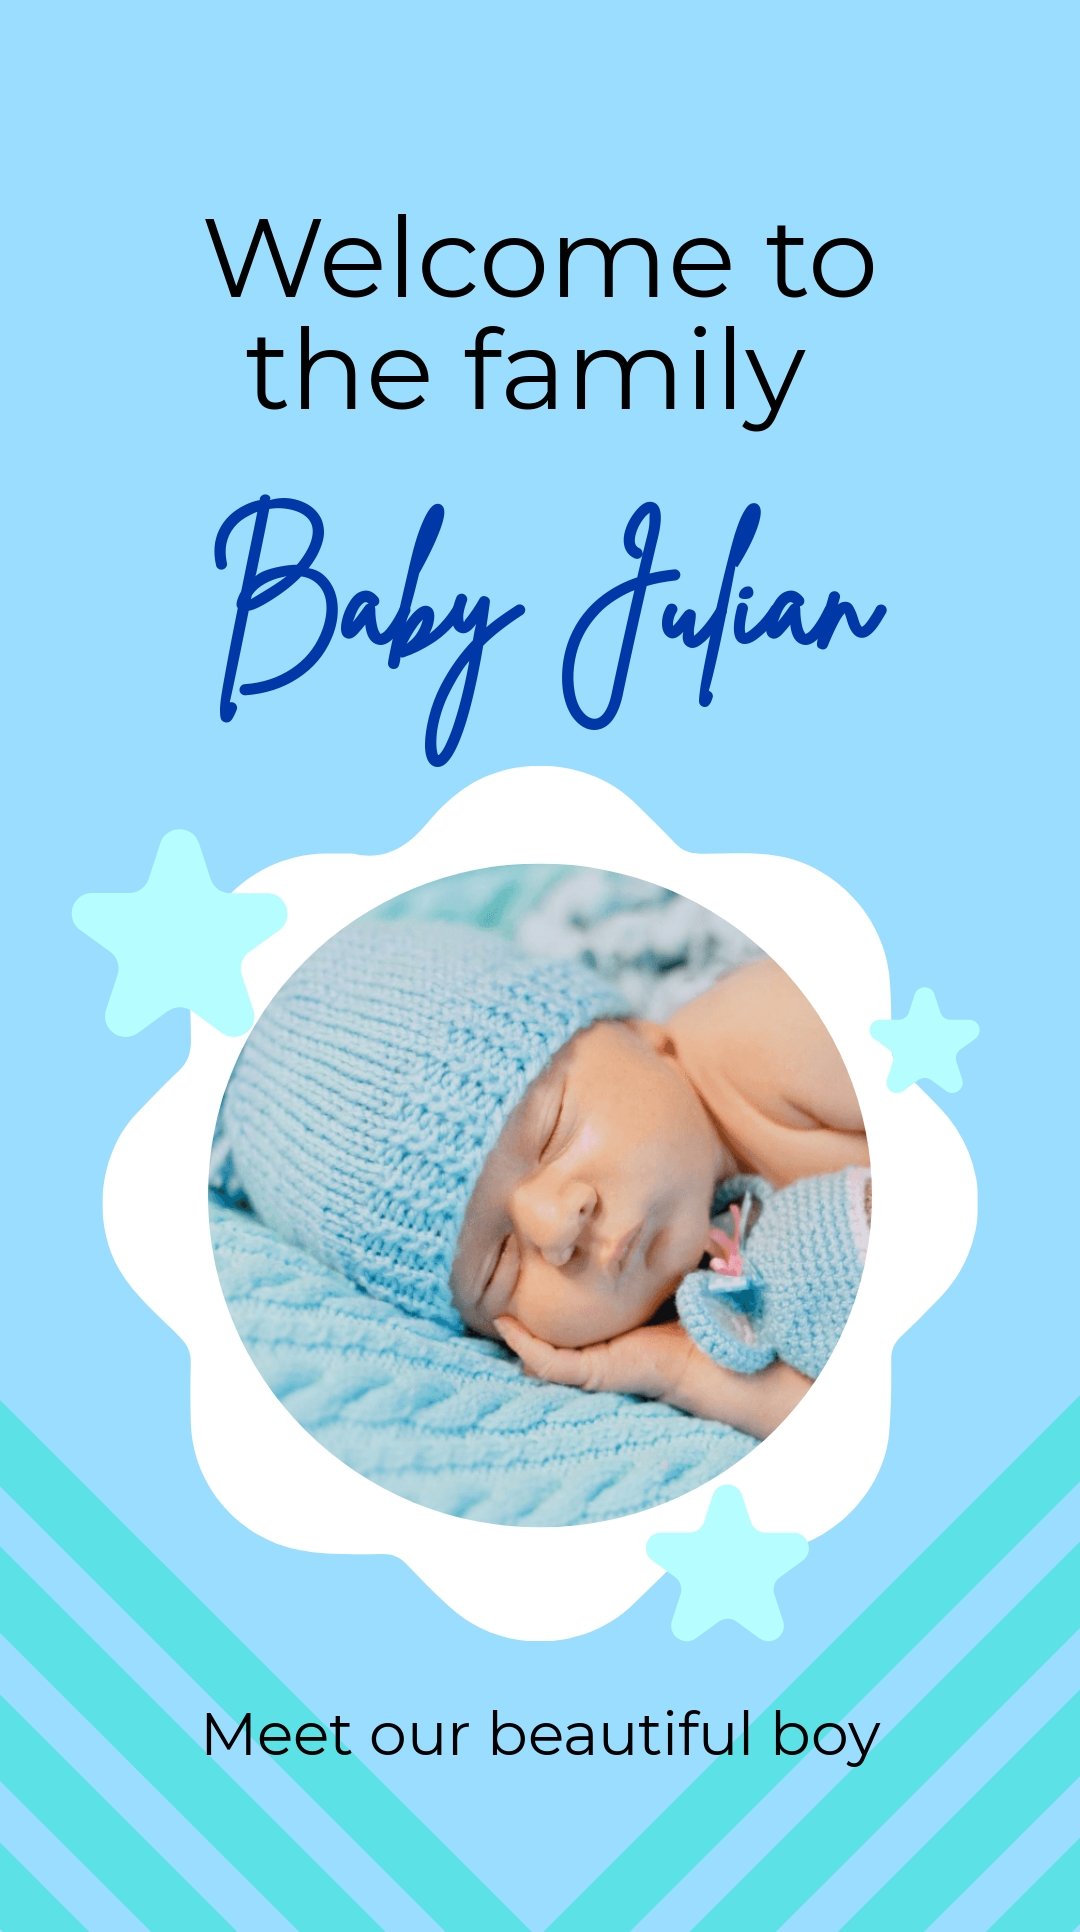 Free Baby Announcement Photo Whatsapp Post Template